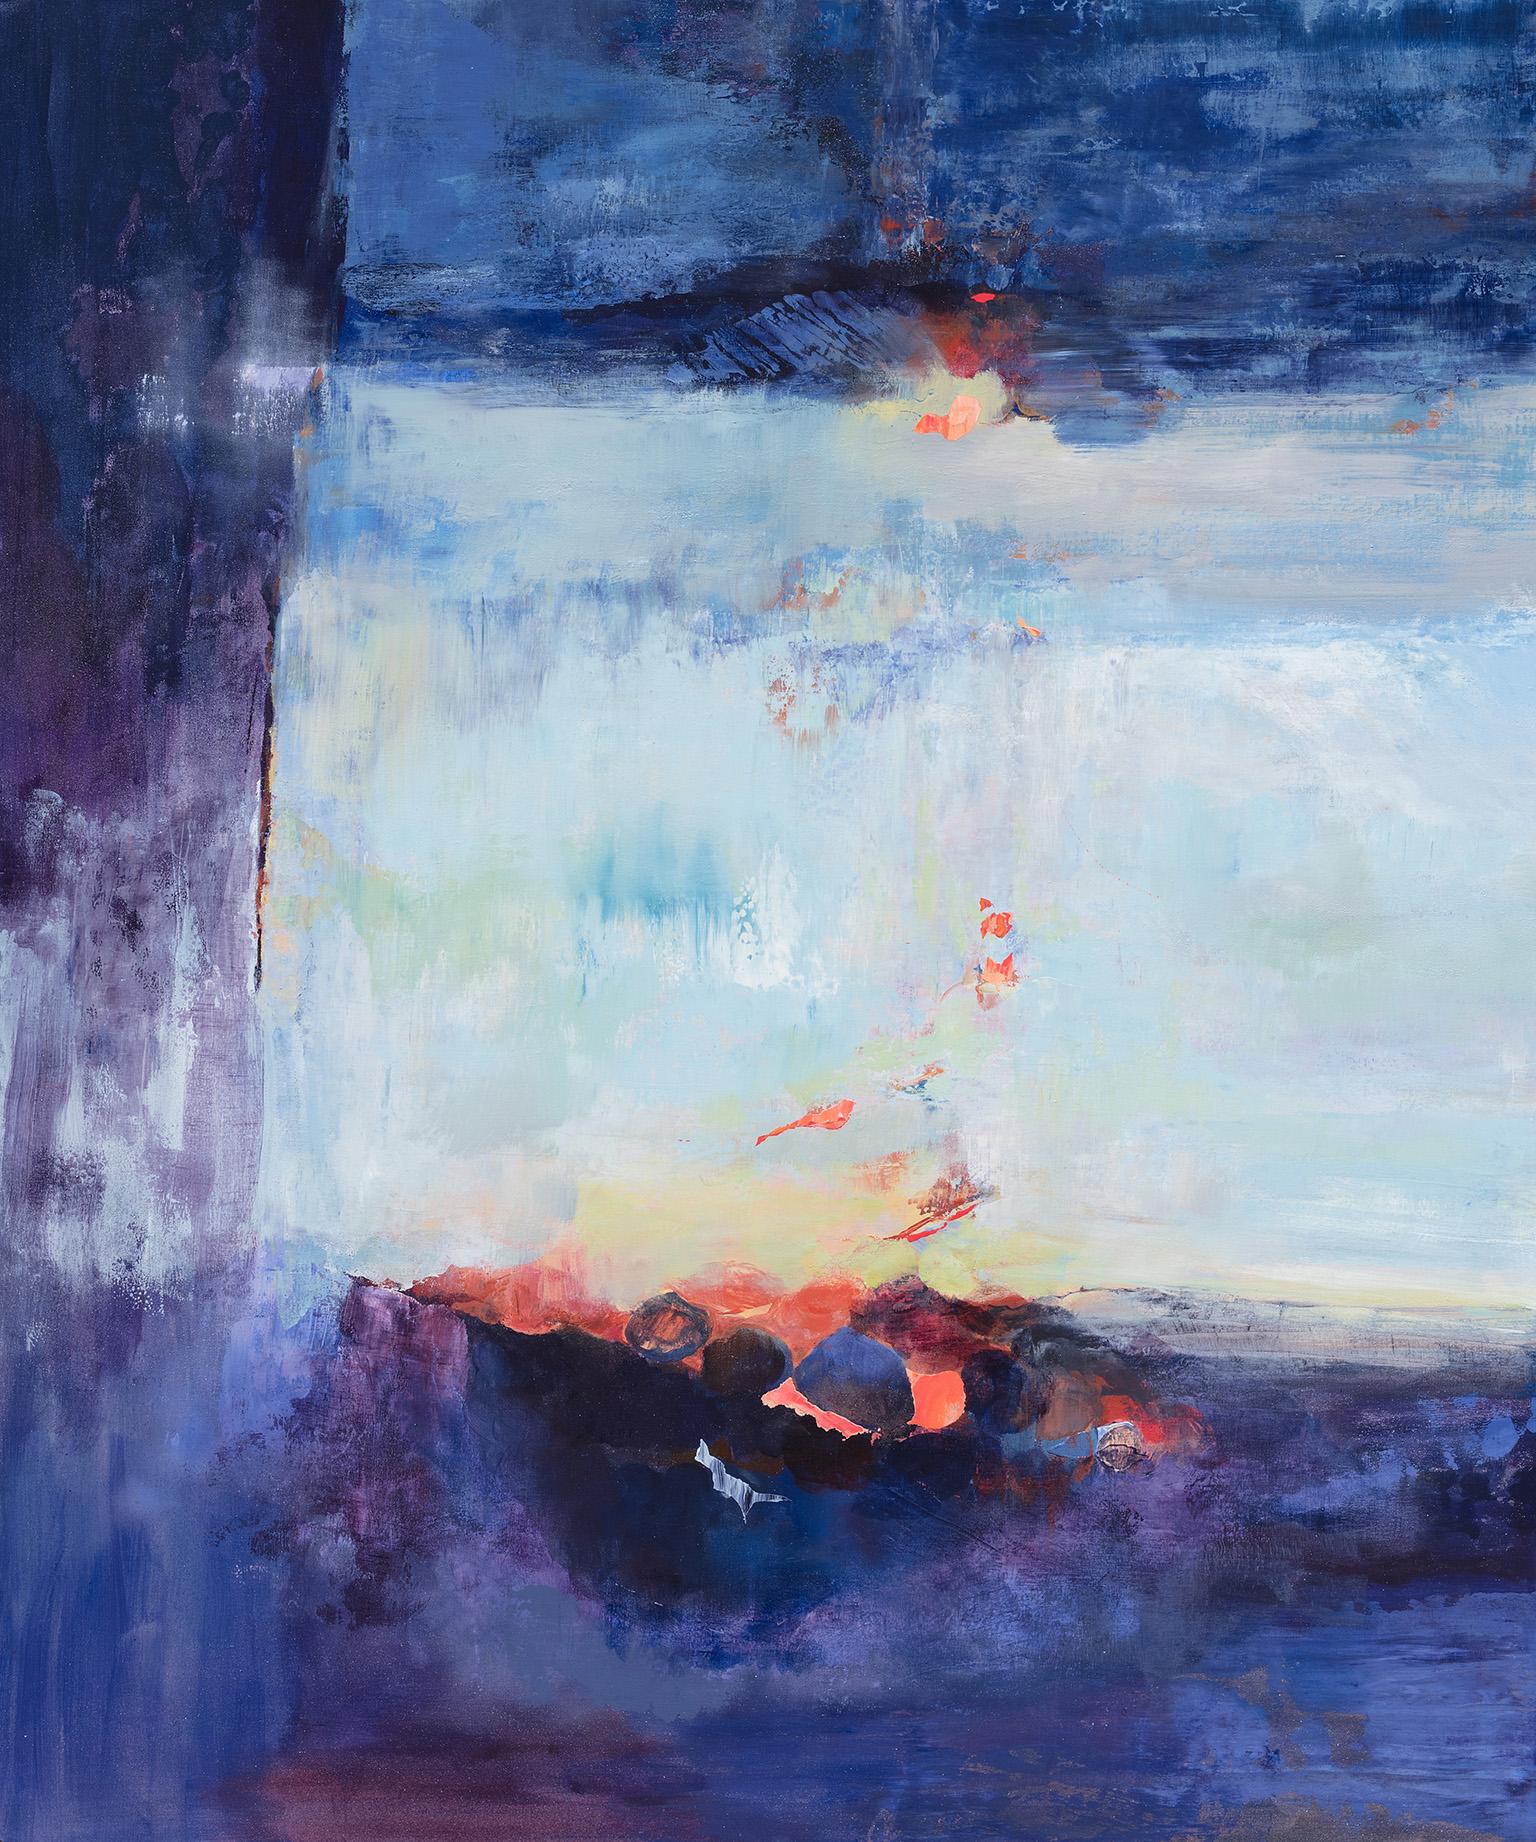 Heart of the Sunrise - Large Abstract Landscape Gestural Painting in Blue